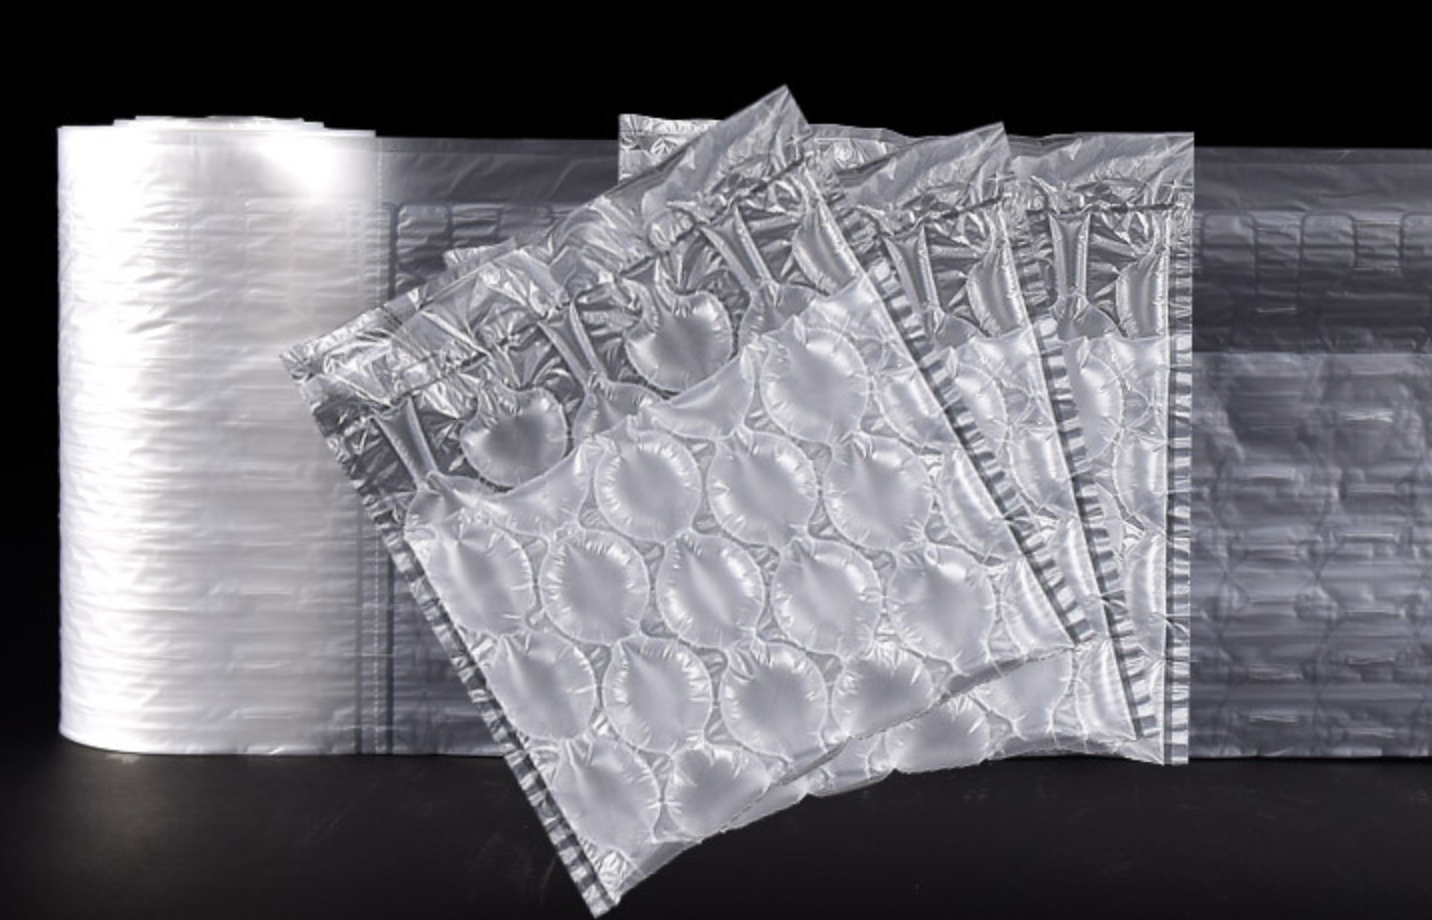 bubble packaging bags